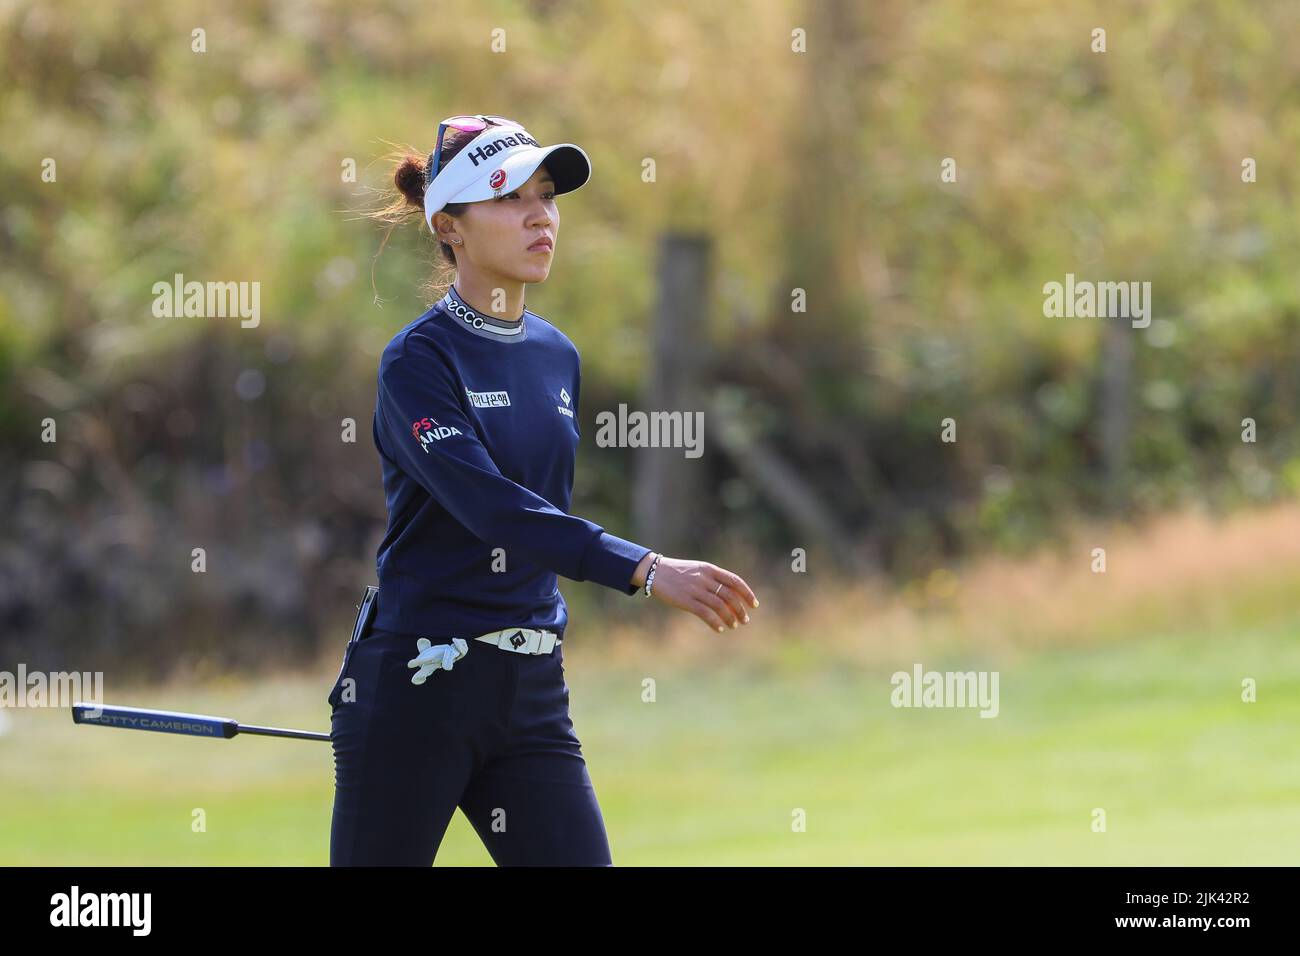 Irvine, UK. 30th July, 2022. The third round of the Trust Golf Women's Scottish Golf took place with 75 players making the cut. Heavy overnight rain from Friday into Saturday made for a softer and more testing course. Lidia Ko walking towards the 13th putting green. Credit: Findlay/Alamy Live News Stock Photo